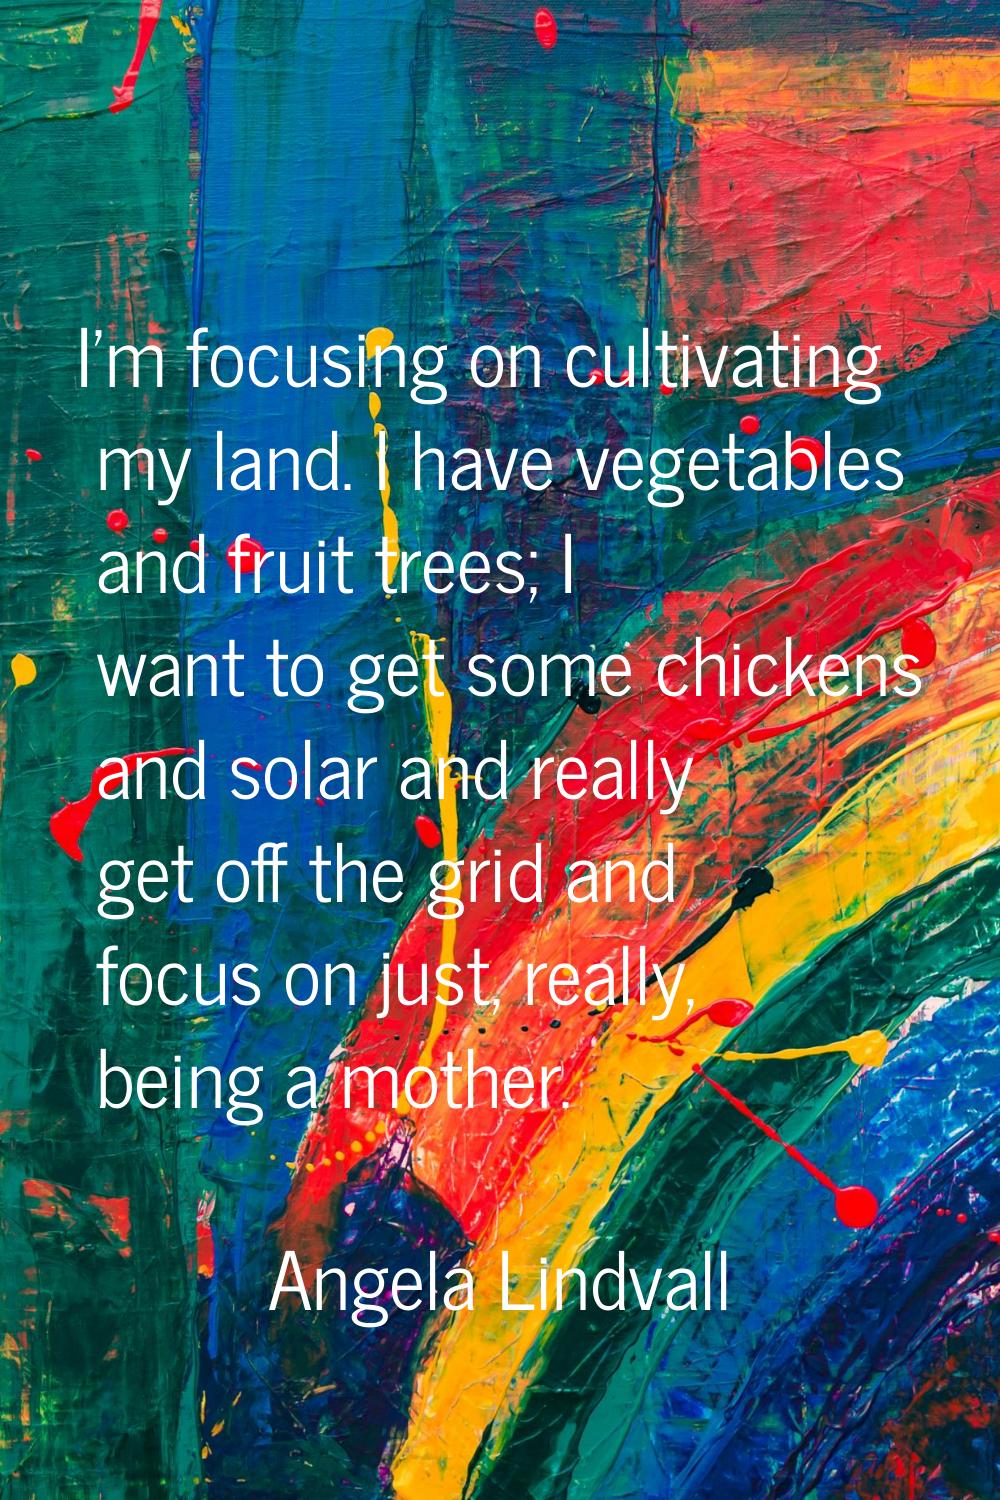 I'm focusing on cultivating my land. I have vegetables and fruit trees; I want to get some chickens